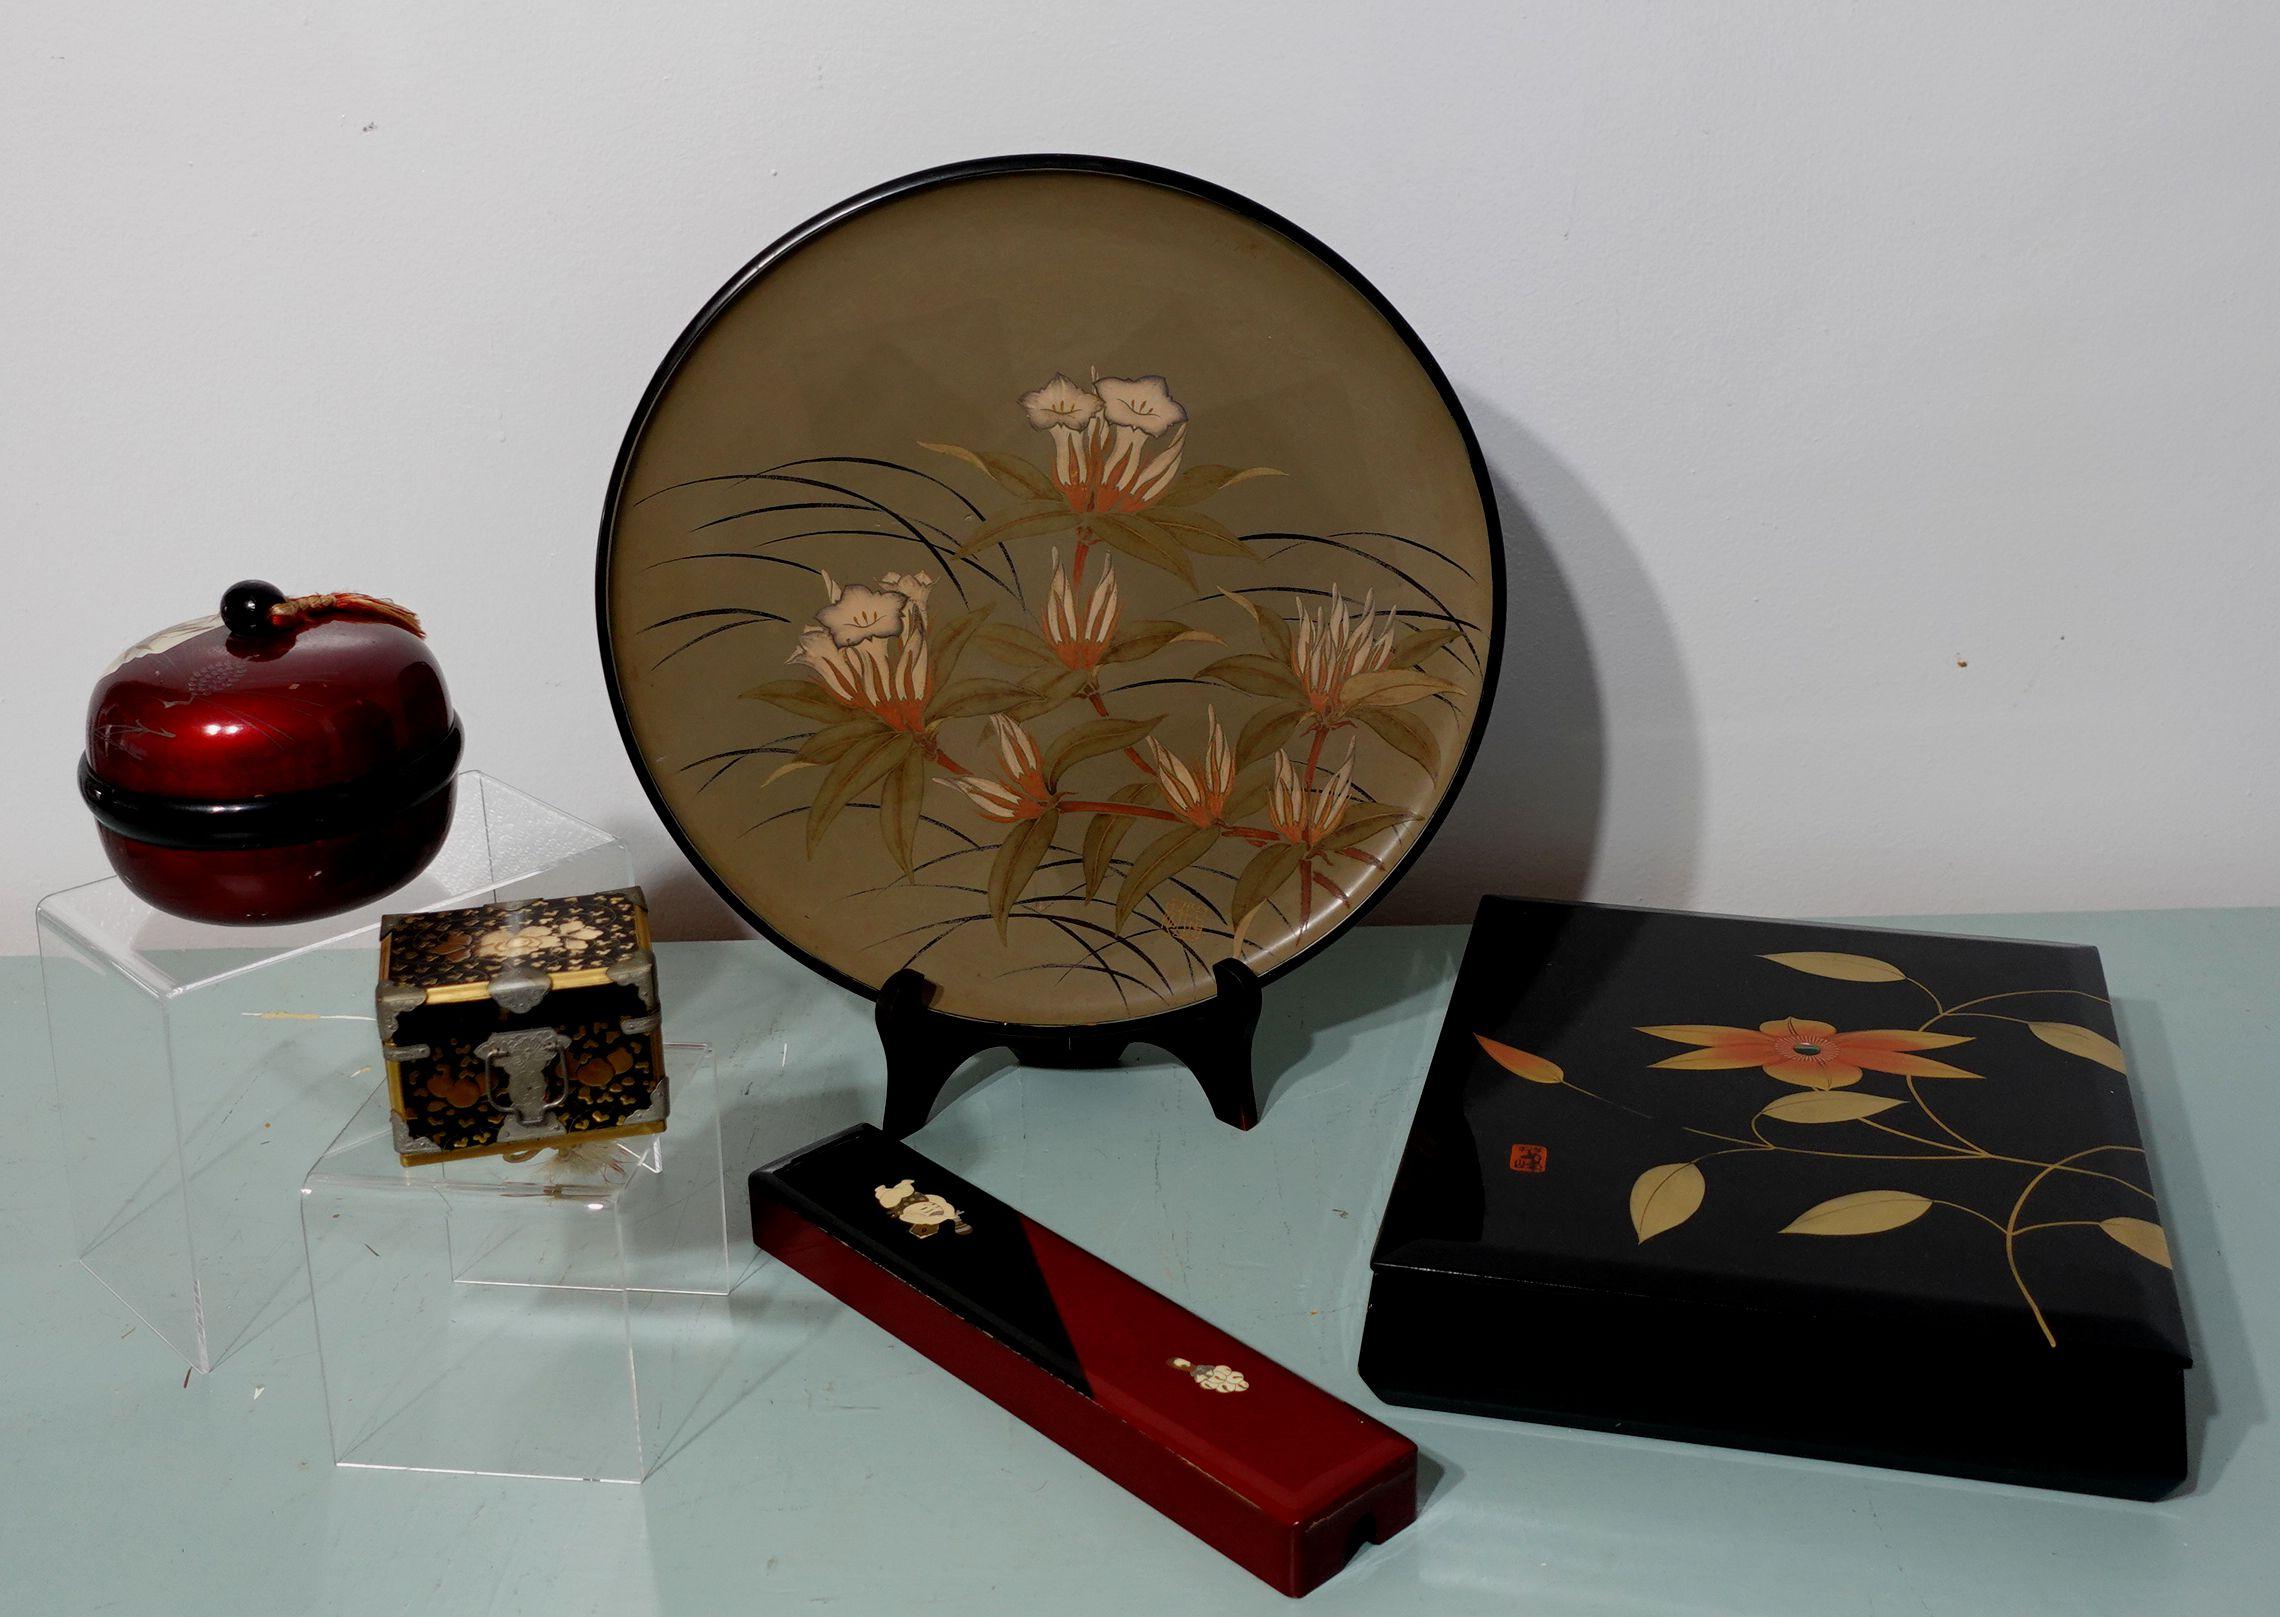 This lot presents 5 beautiful Japanese lacquer works all hand-painted including:
1. a lidded rice bowl, 4.5 diameter x 4